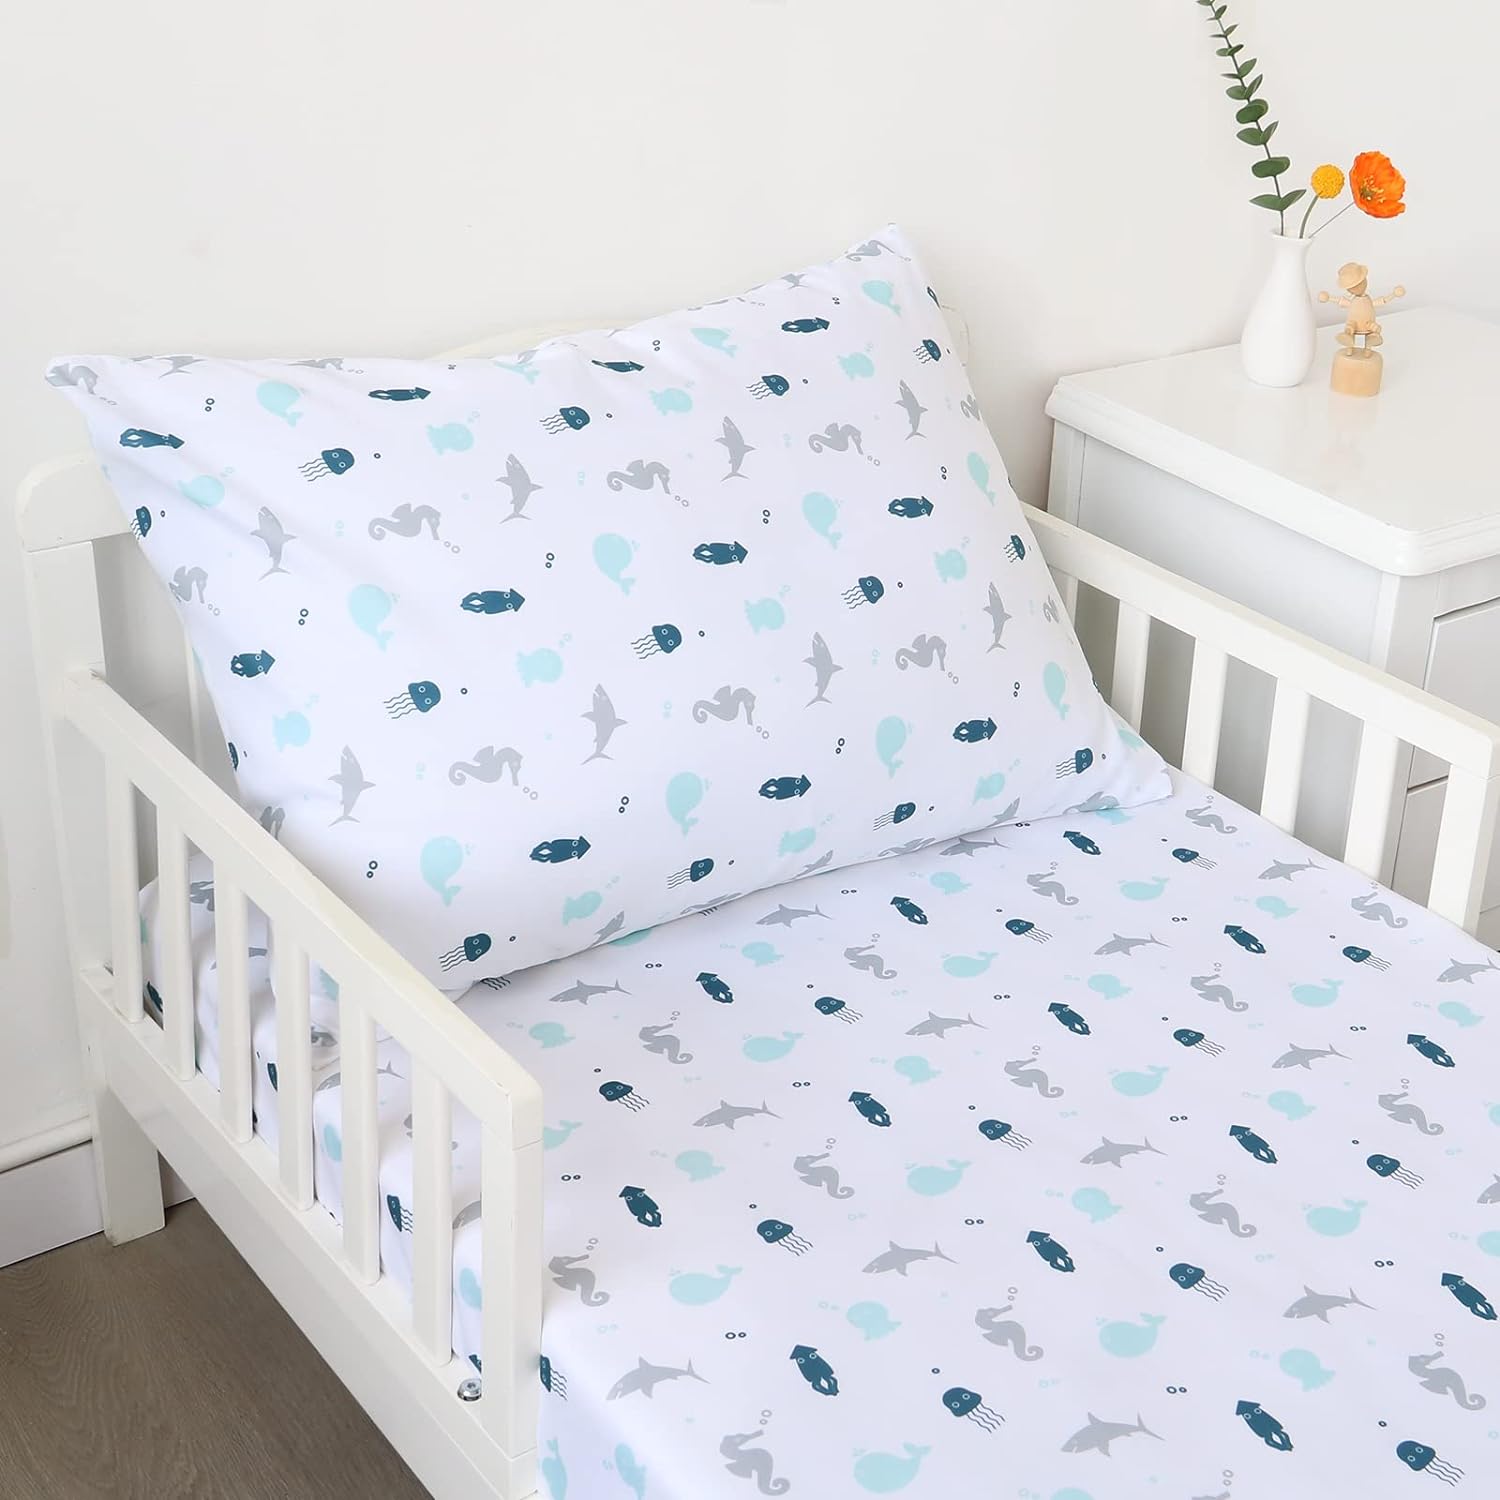 Toddler Bedding Set - 2 Pieces, Includes a Crib Fitted Sheet and Envelope Pillowcase, Soft and Breathable, White Ocean - Biloban Online Store